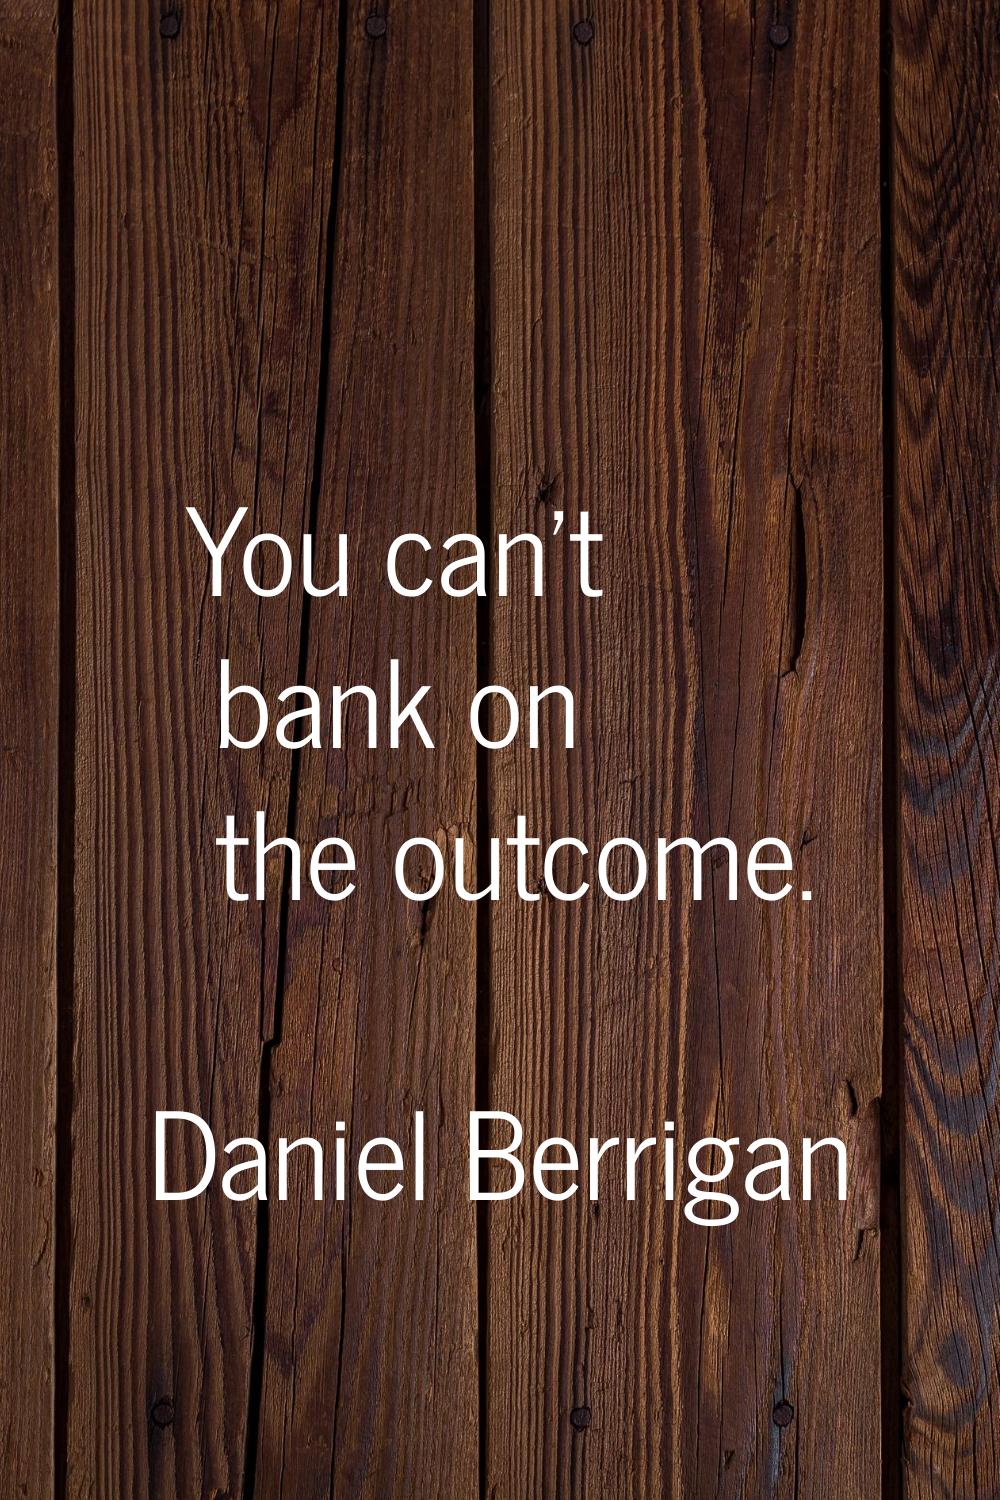 You can't bank on the outcome.